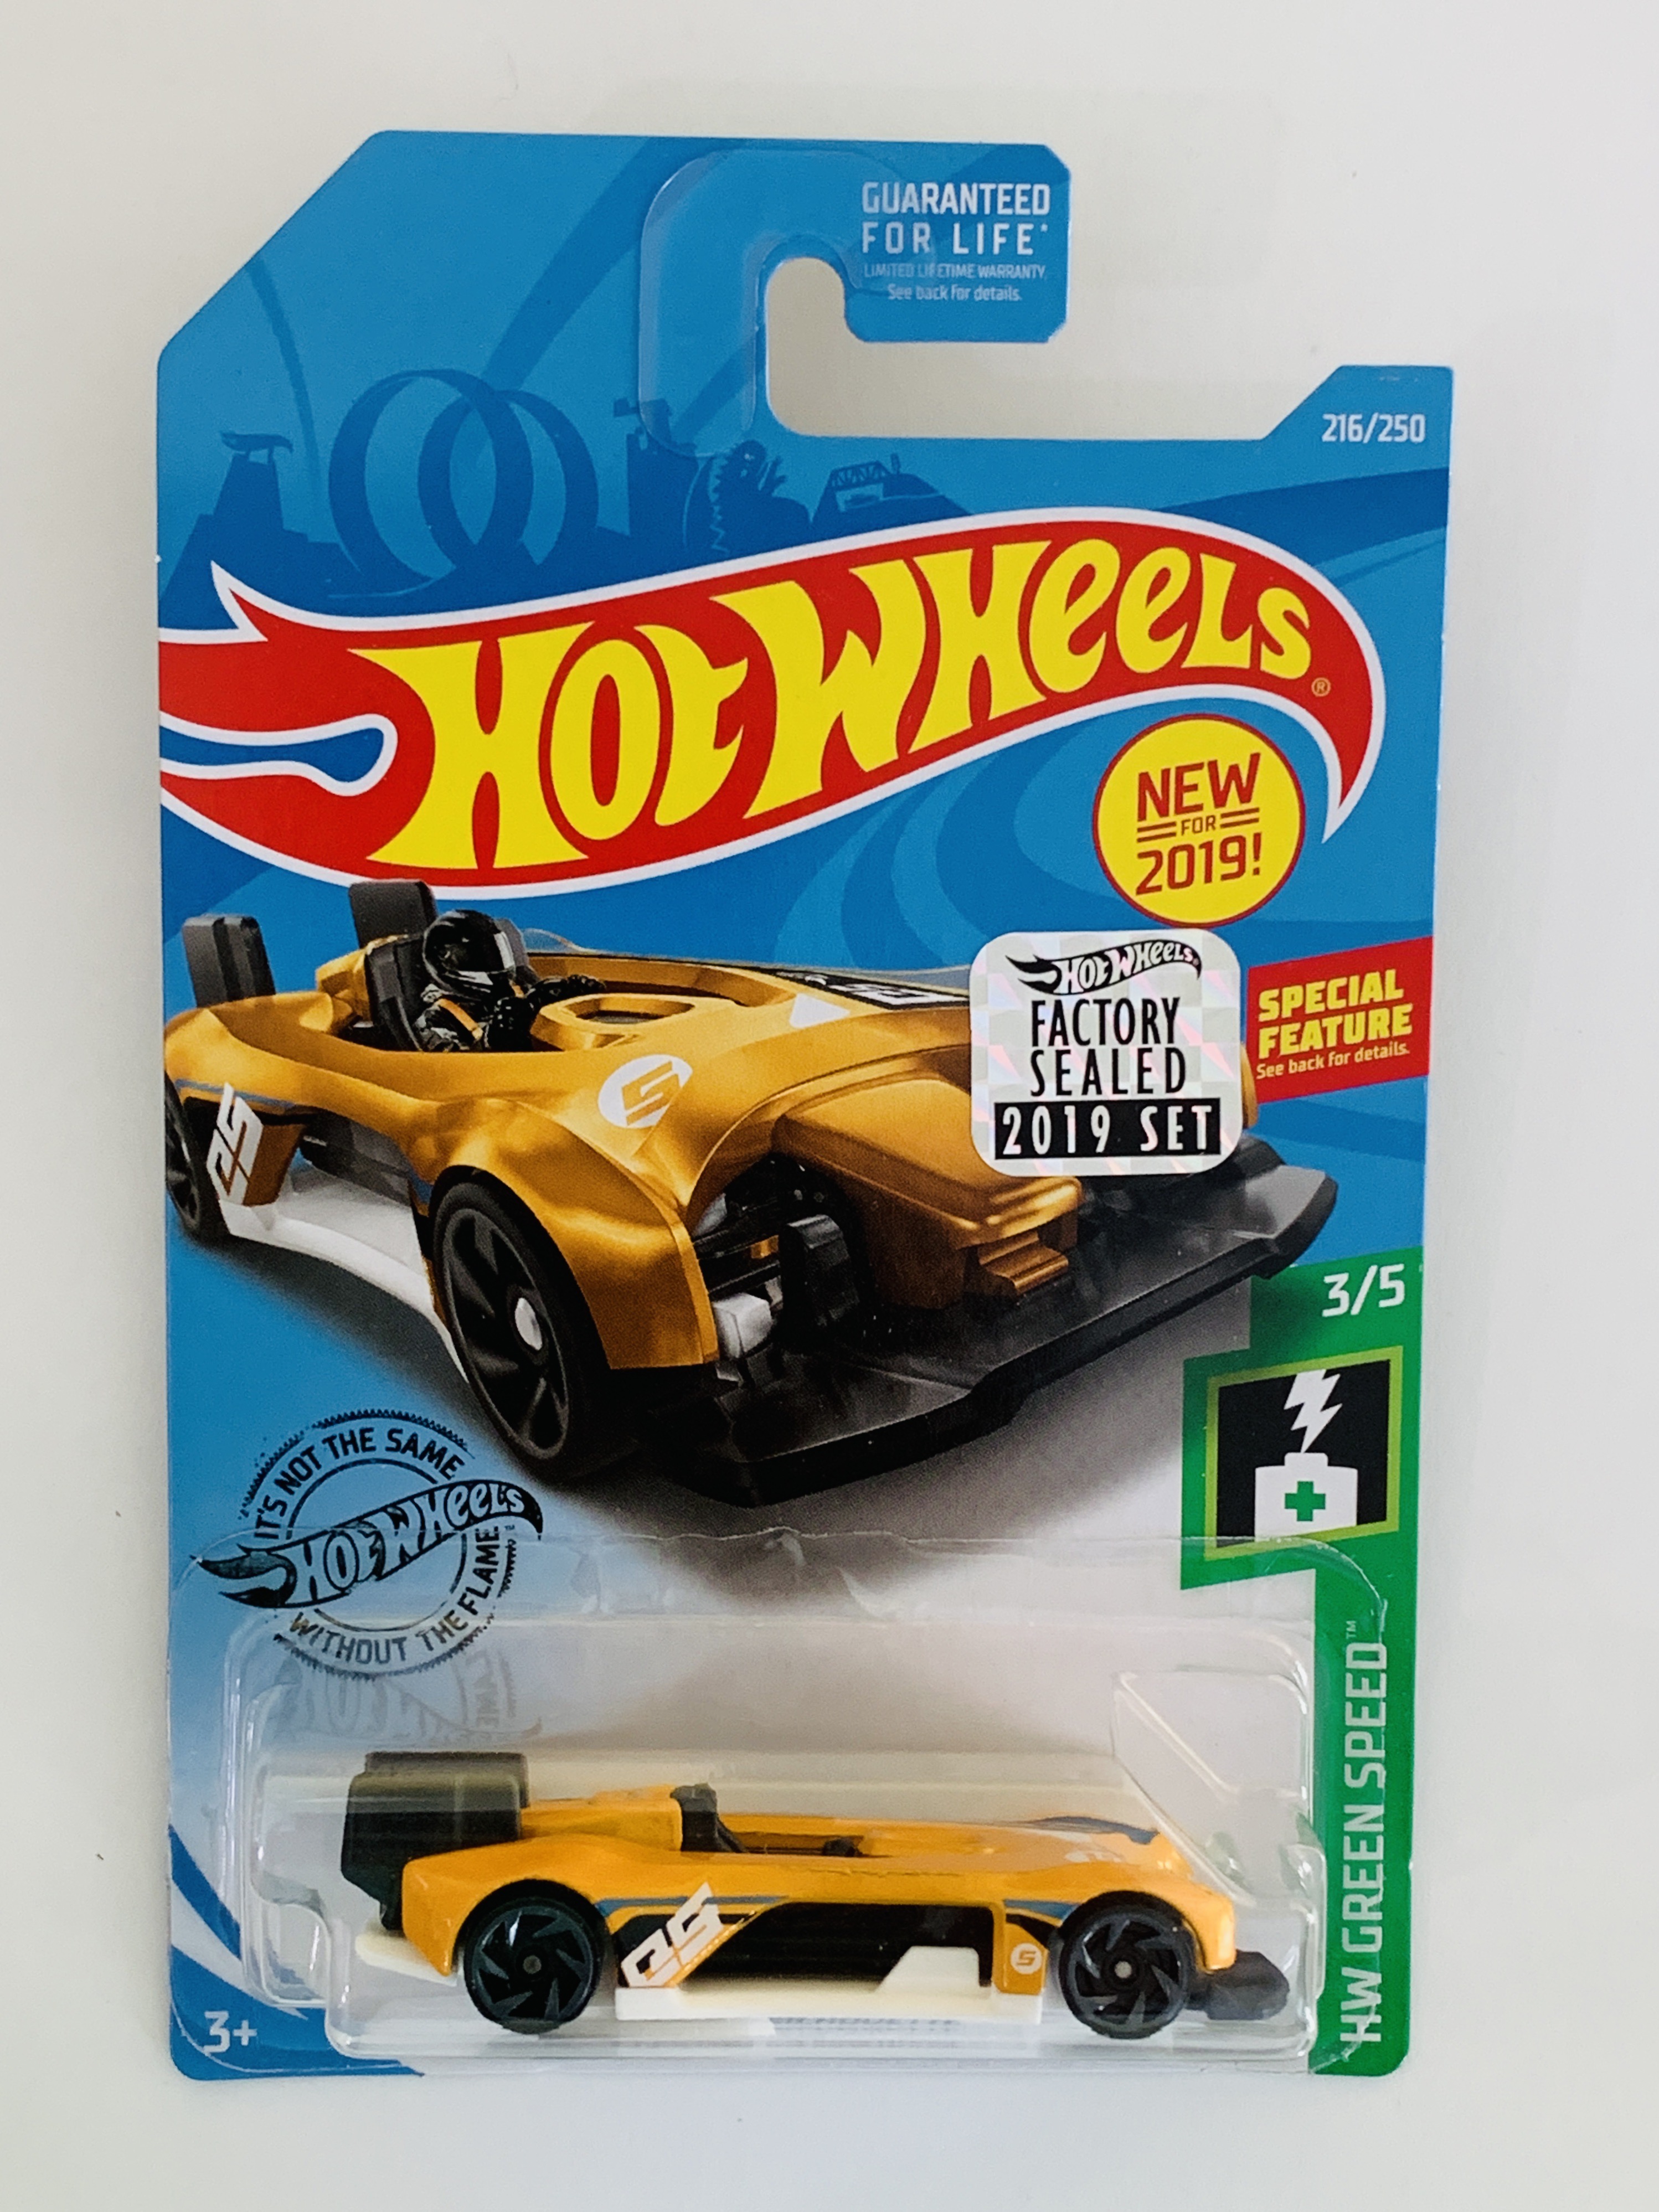  Hot Wheels 2019 Factory Set #216 Electro Silhouette - Yellow